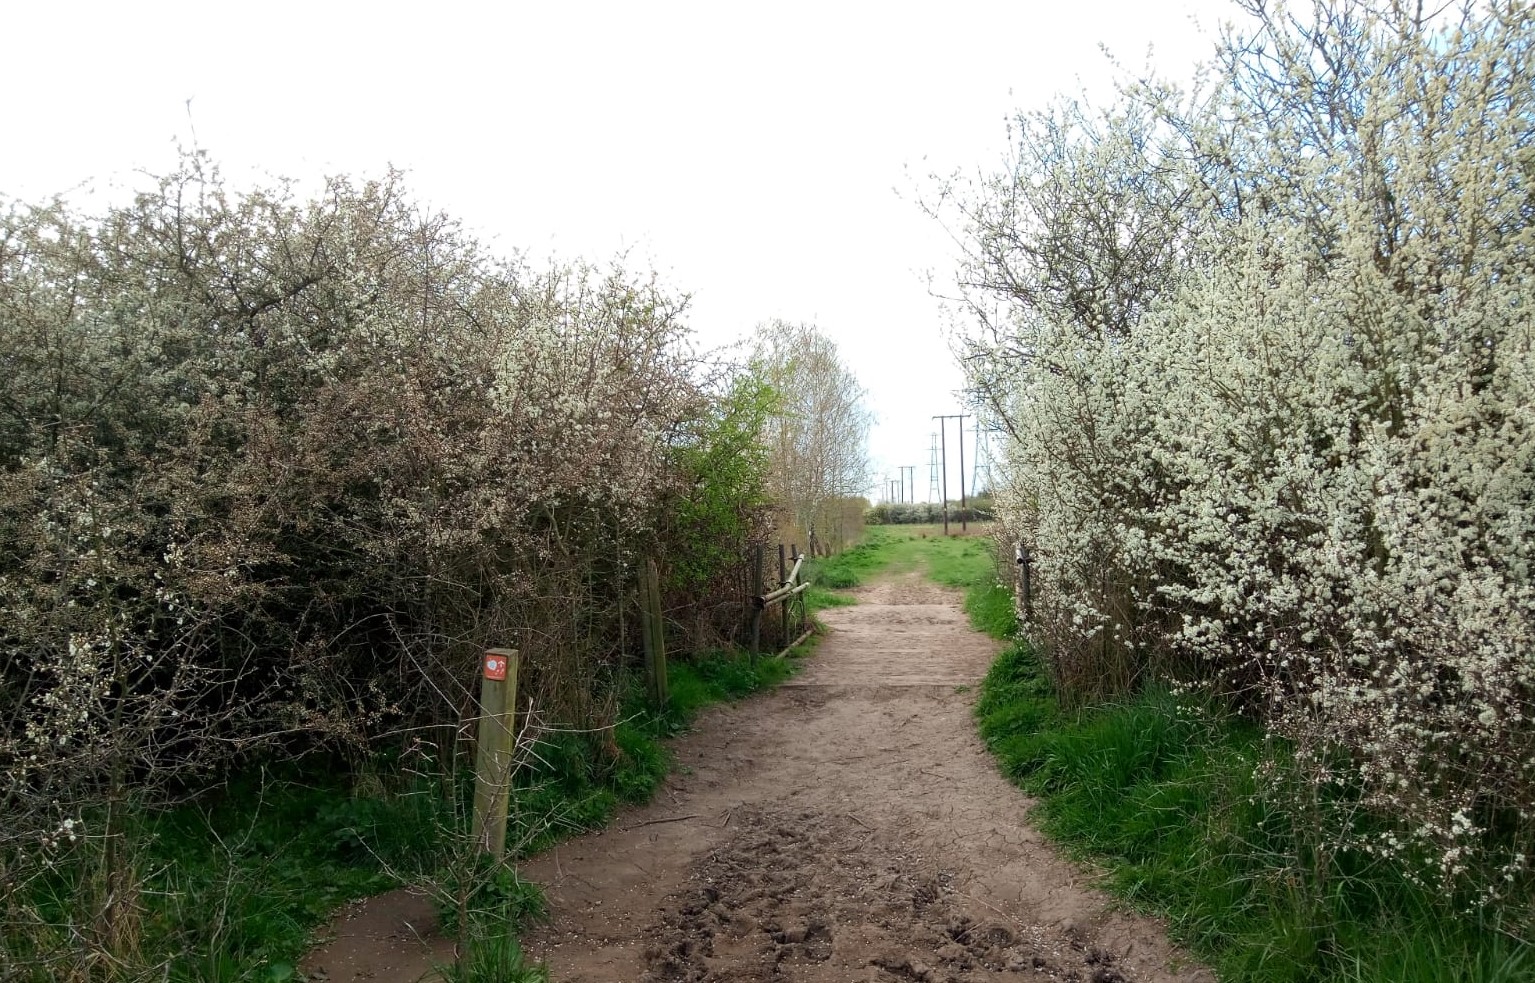 Footpath through hedge with blackthorn blossom and wooden bridge